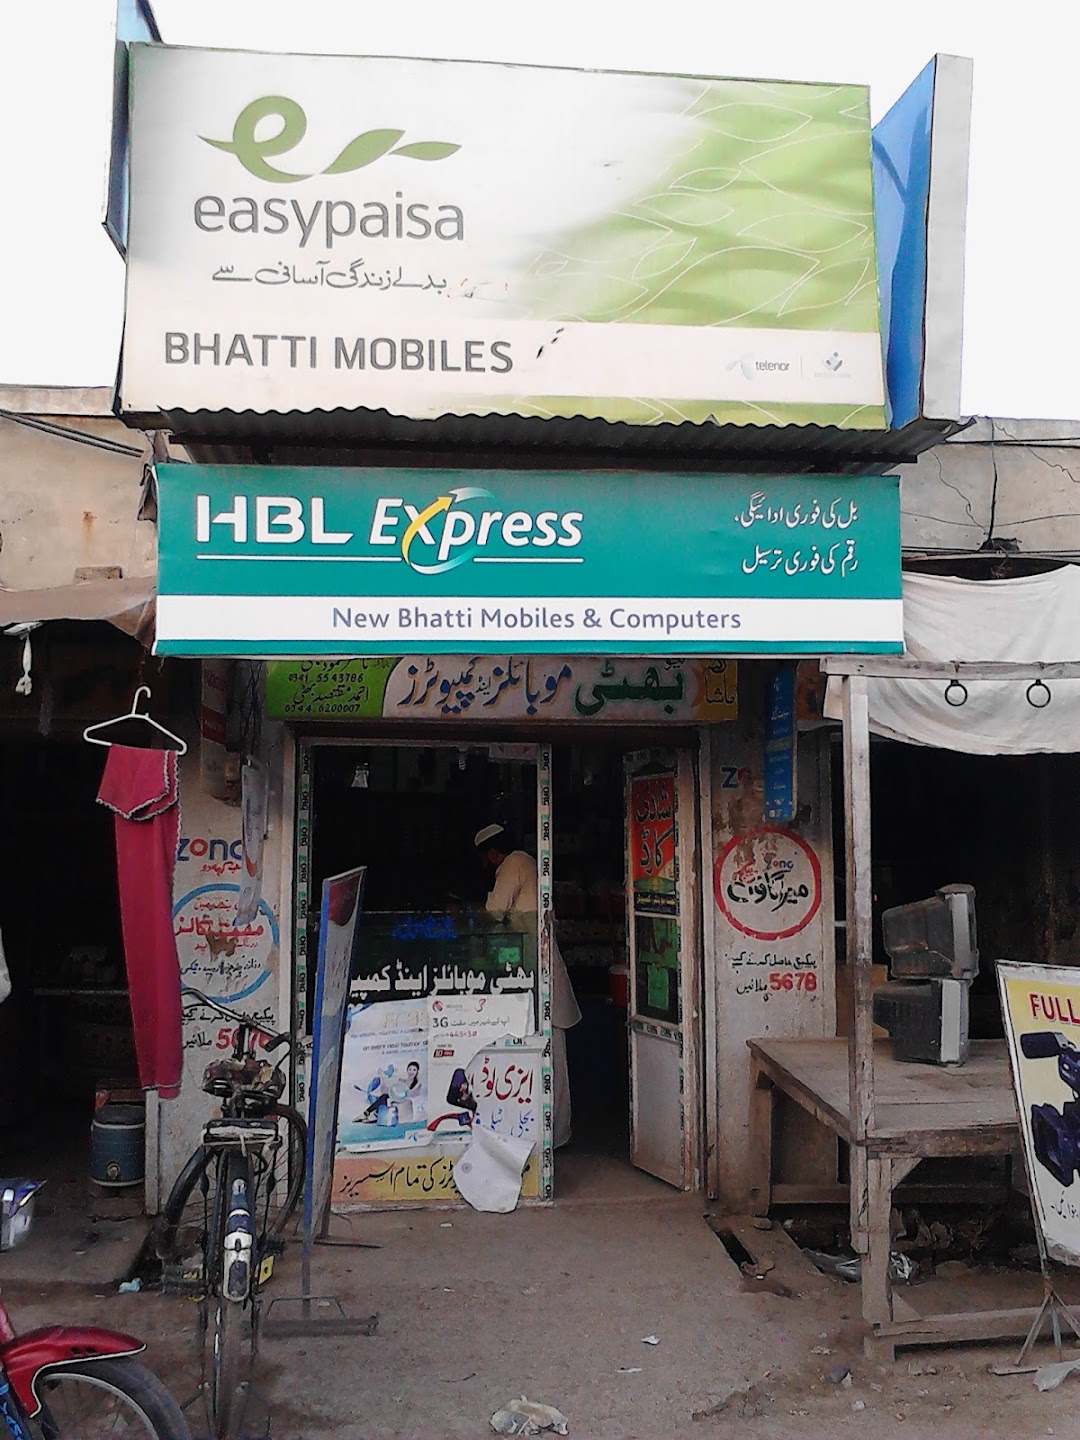 New Bhatti Mobiles & Computers